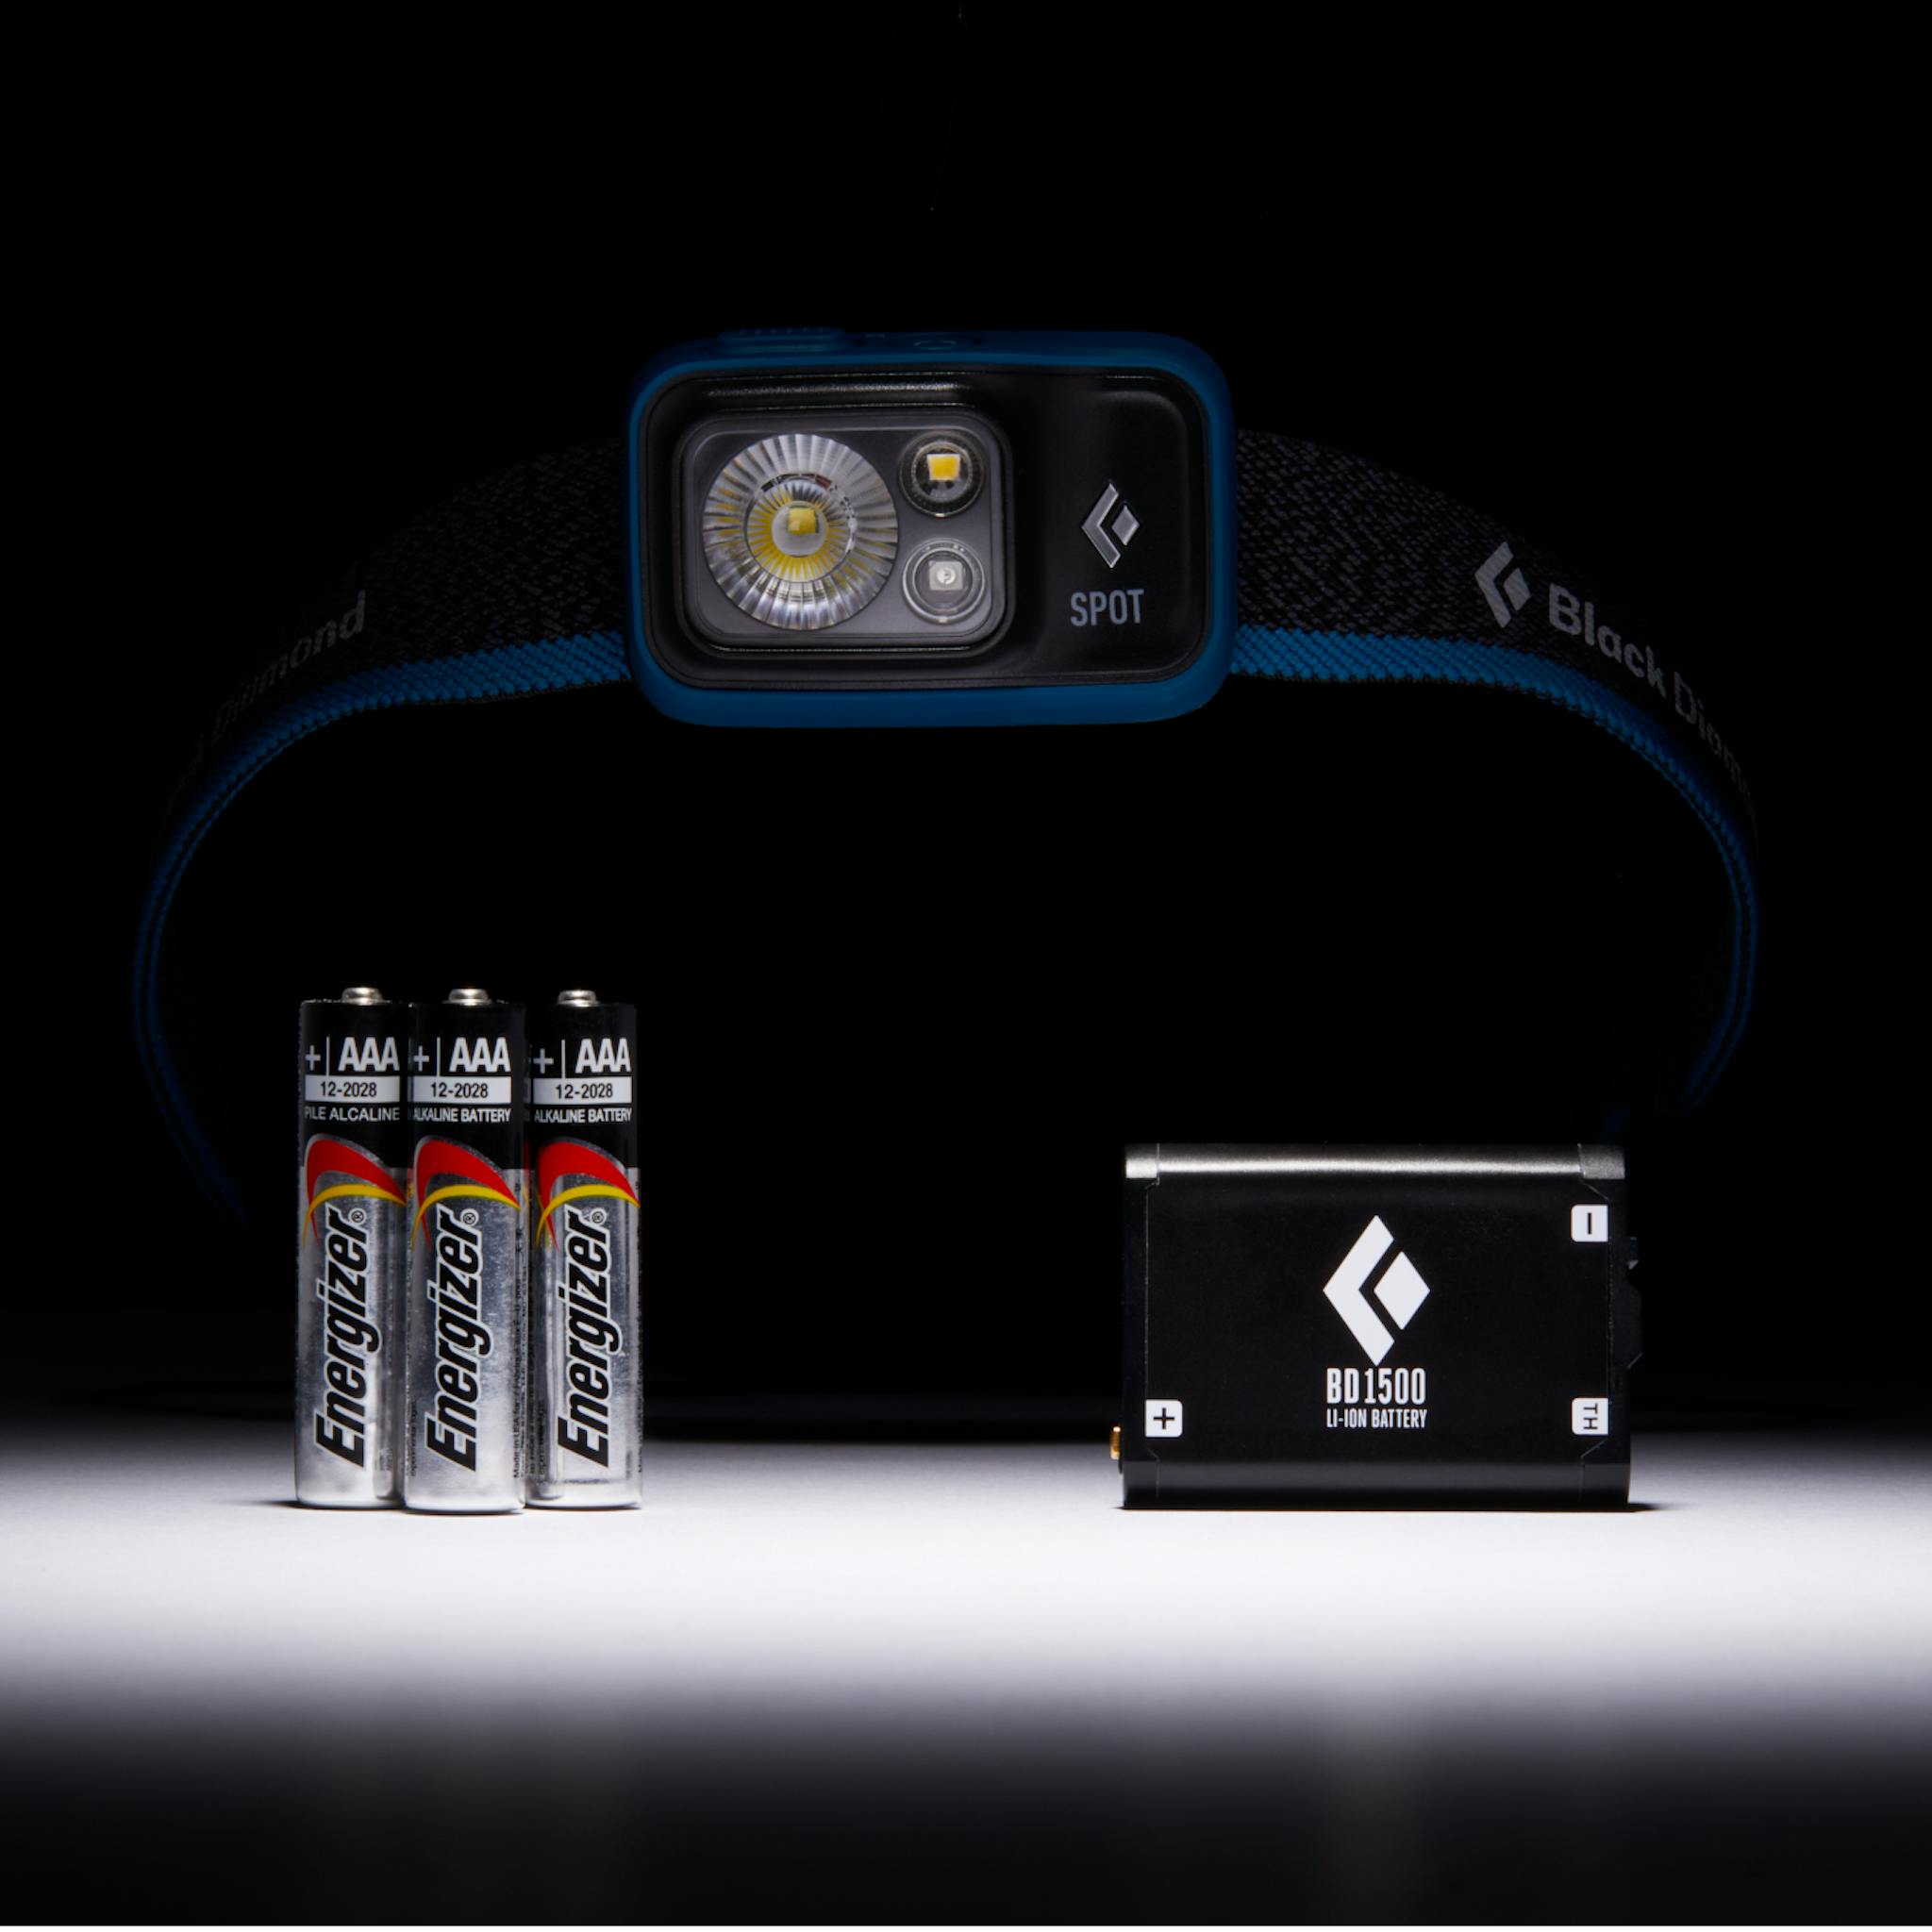 A picture of the Spot 400 Headlamp with three AAA batteries on the left and a BD 1500 on the right.